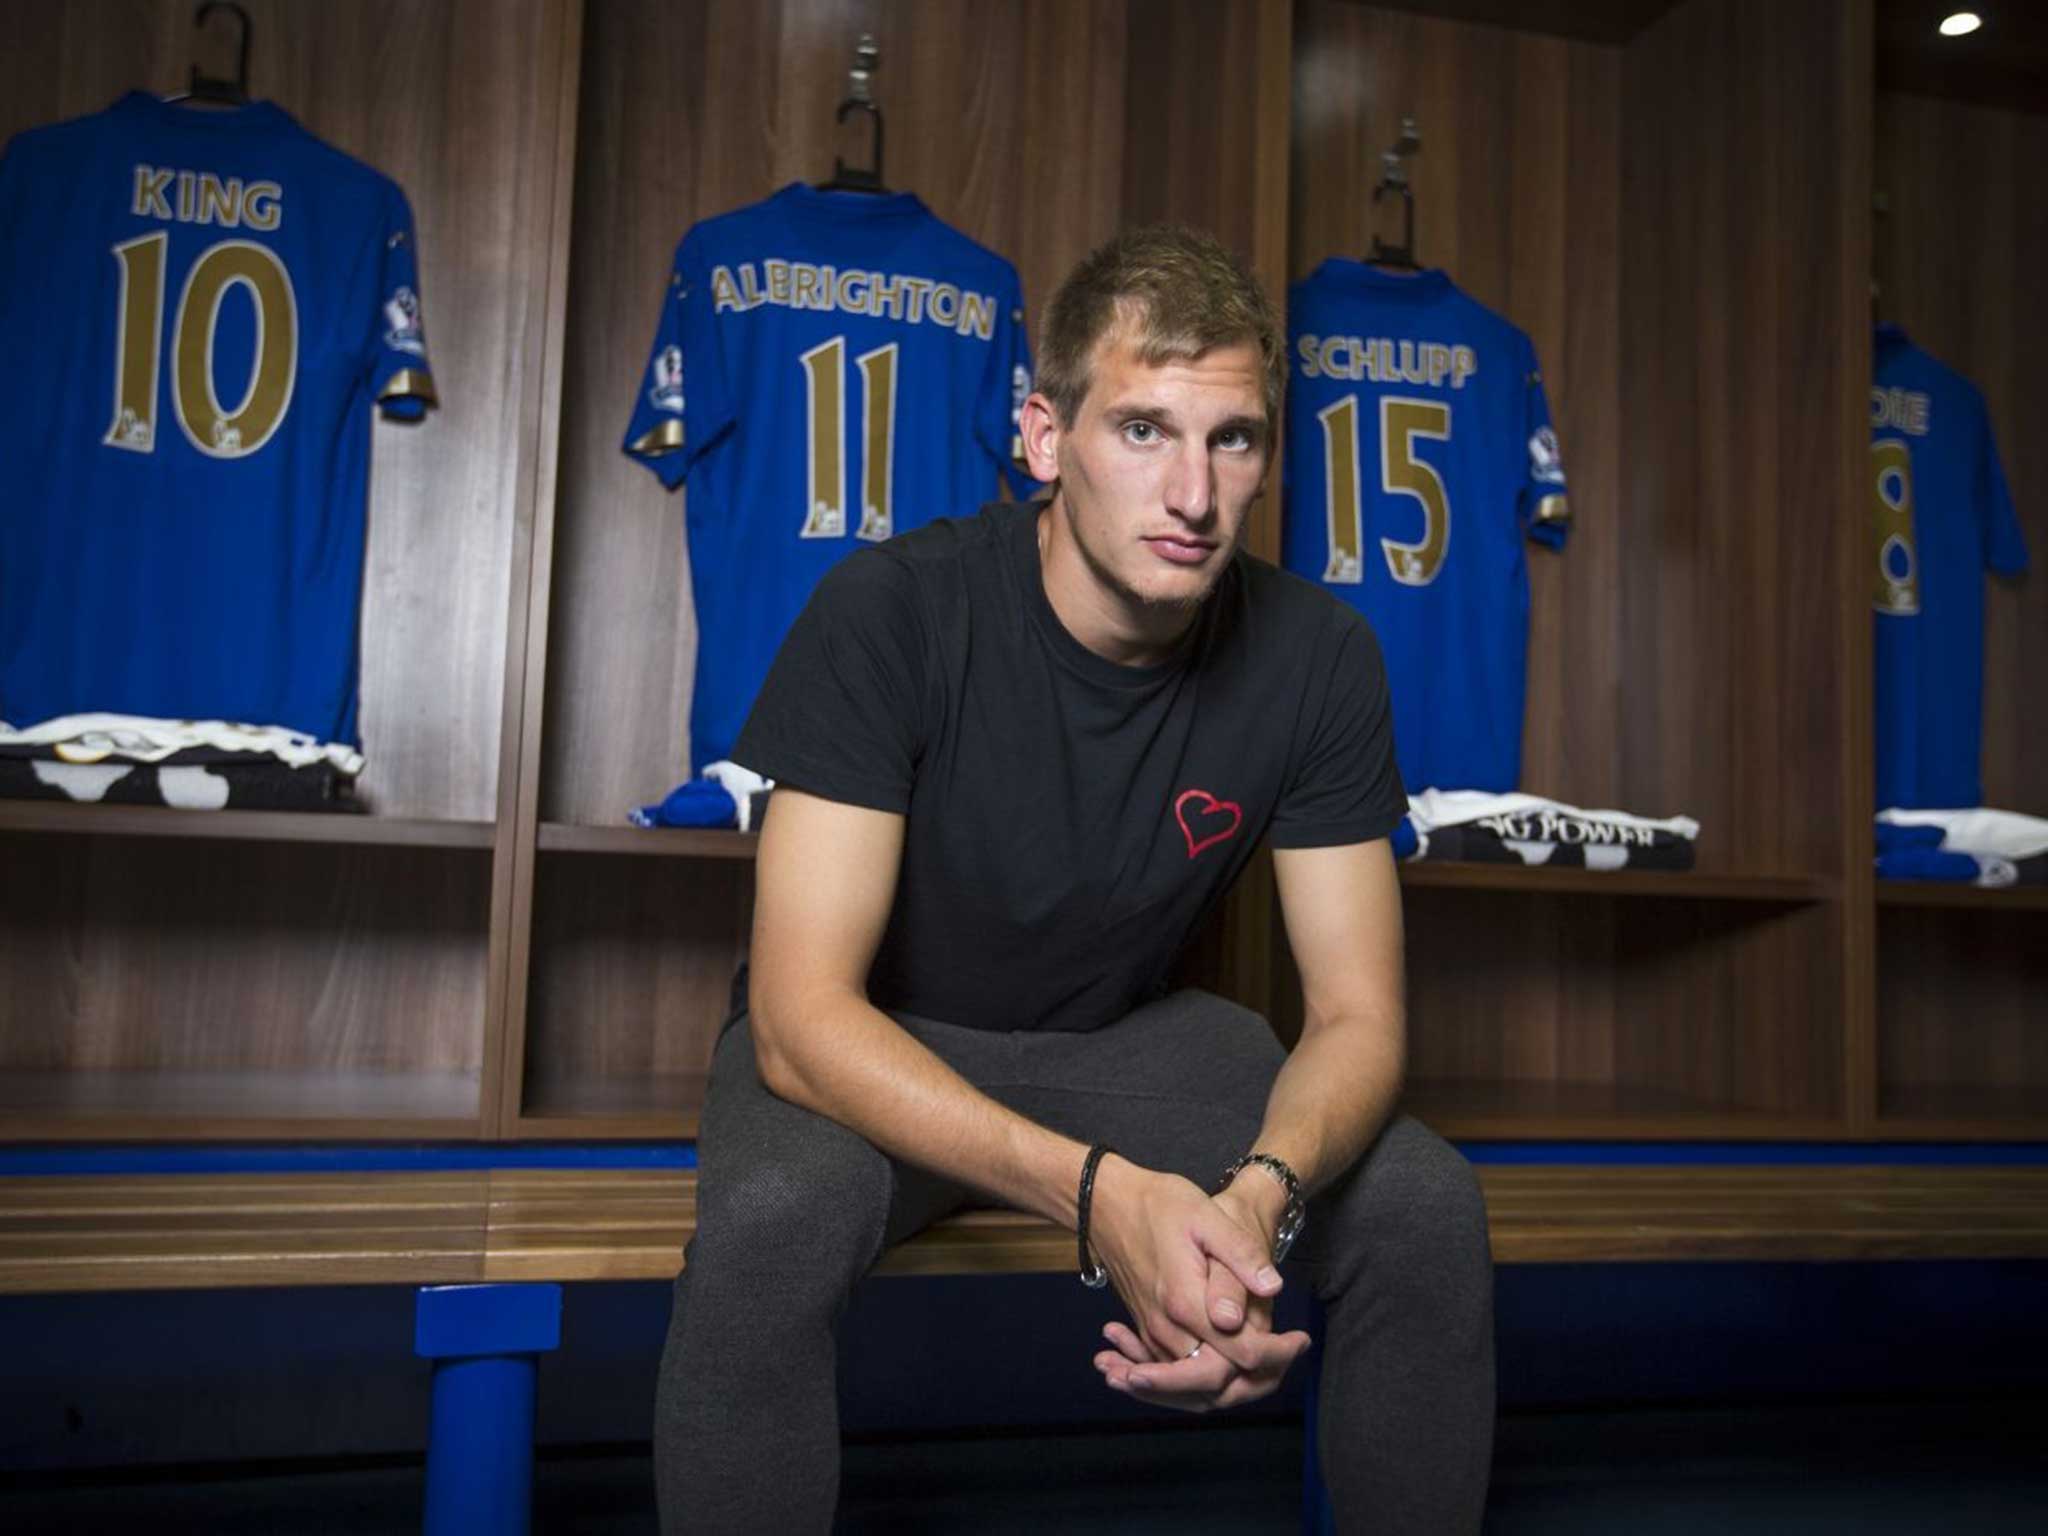 On the marc: Marc Albrighton had some relegation fights in his 16 years at Aston Villa so if the going gets tough for Leicester, he is ready